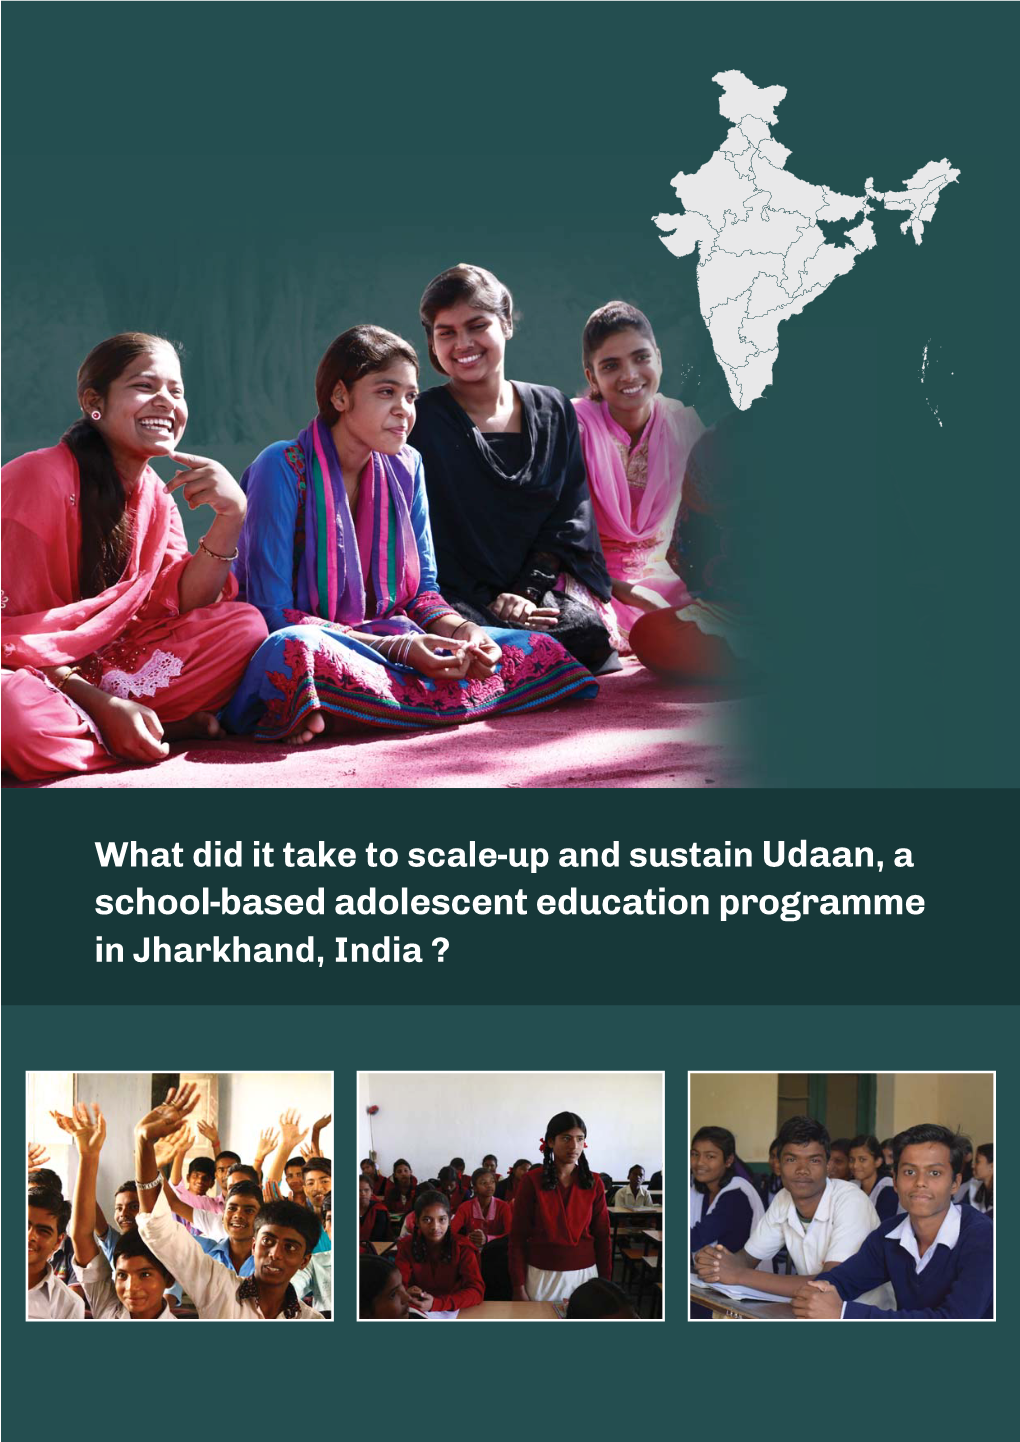 What Did It Take to Scale-Up and Sustain Udaan, a School-Based Adolescent Education Programme in Jharkhand, India ?